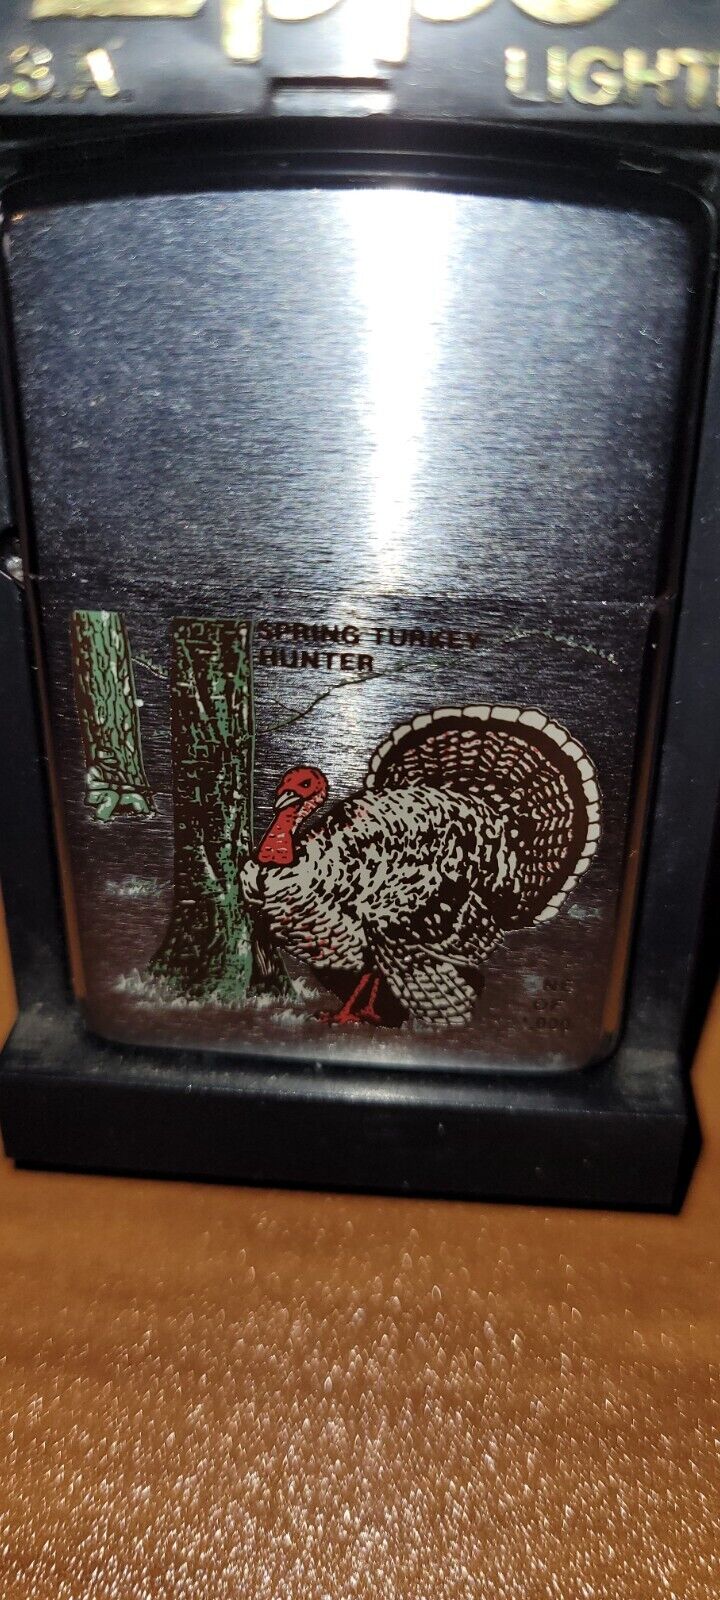 Zippo 1991 New Never fired Spring Turkey Hunter 1 of 1000 limited edition